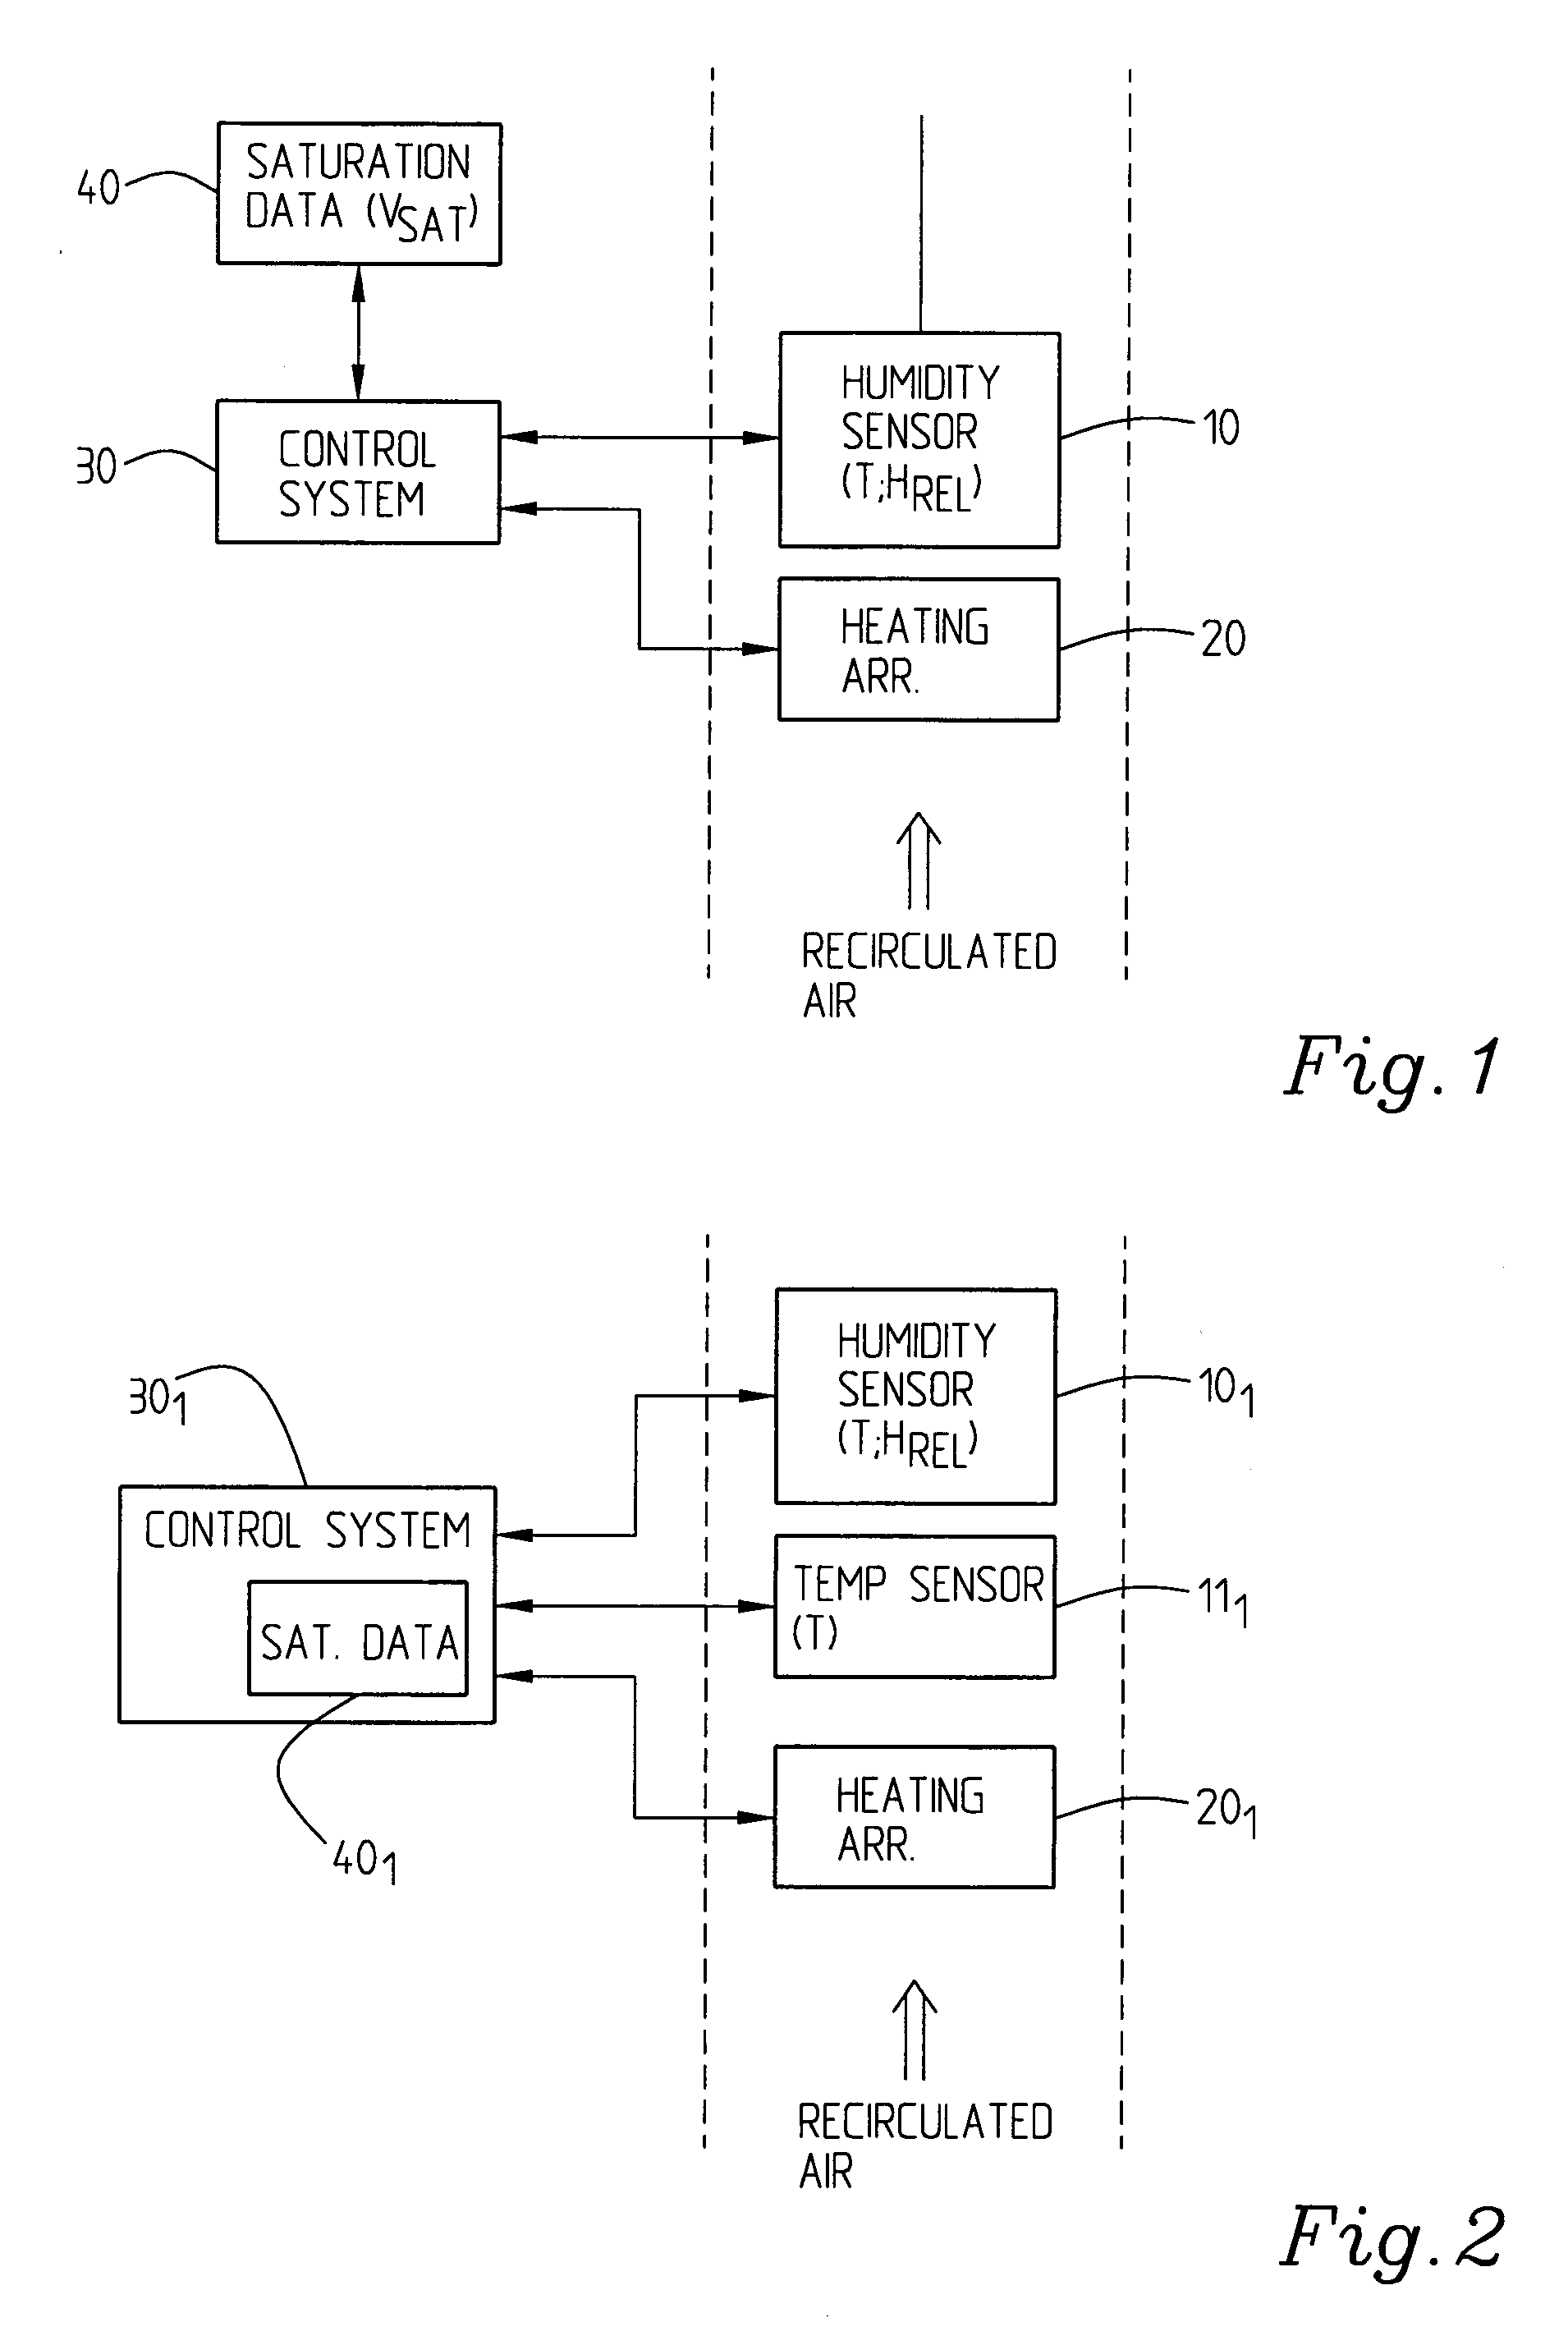 System and a Method Relating to Measuring Humidity in a Ventilated Space